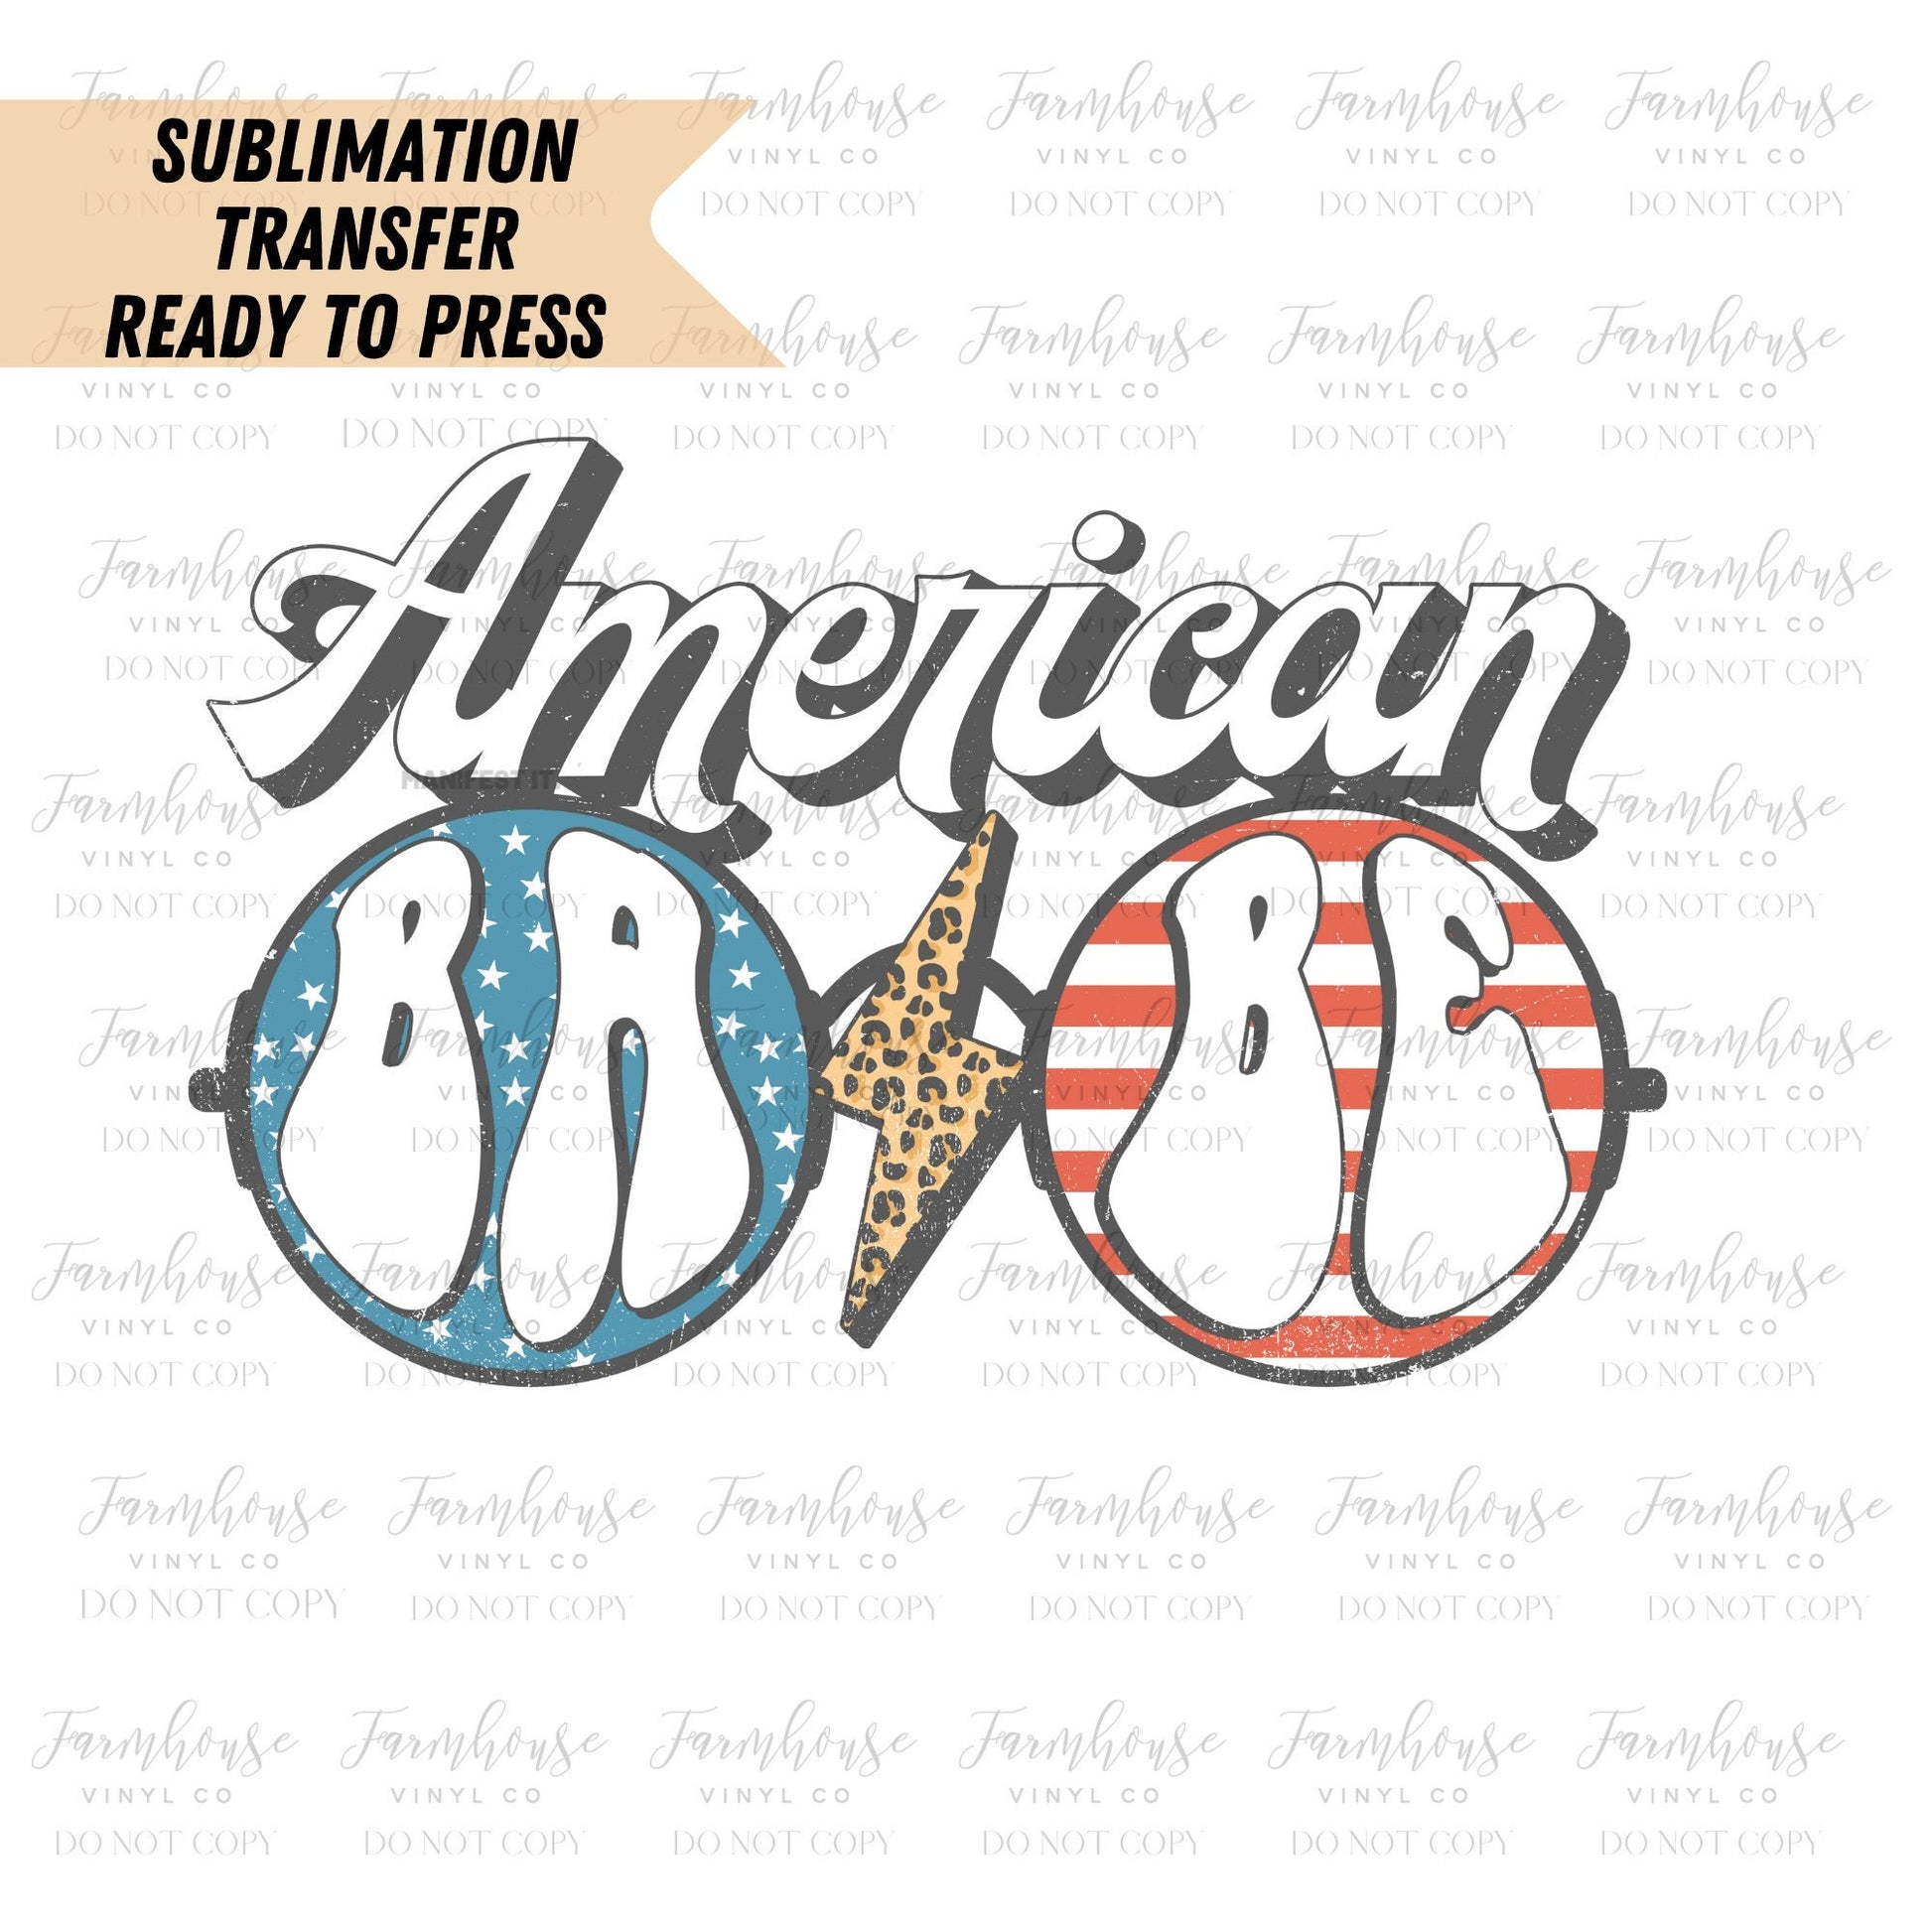 Retro 4th of July American Babe, Ready to Press Sublimation Transfer, Sublimation Transfers, Heat Transfer, Retro 4th of July Design - Farmhouse Vinyl Co